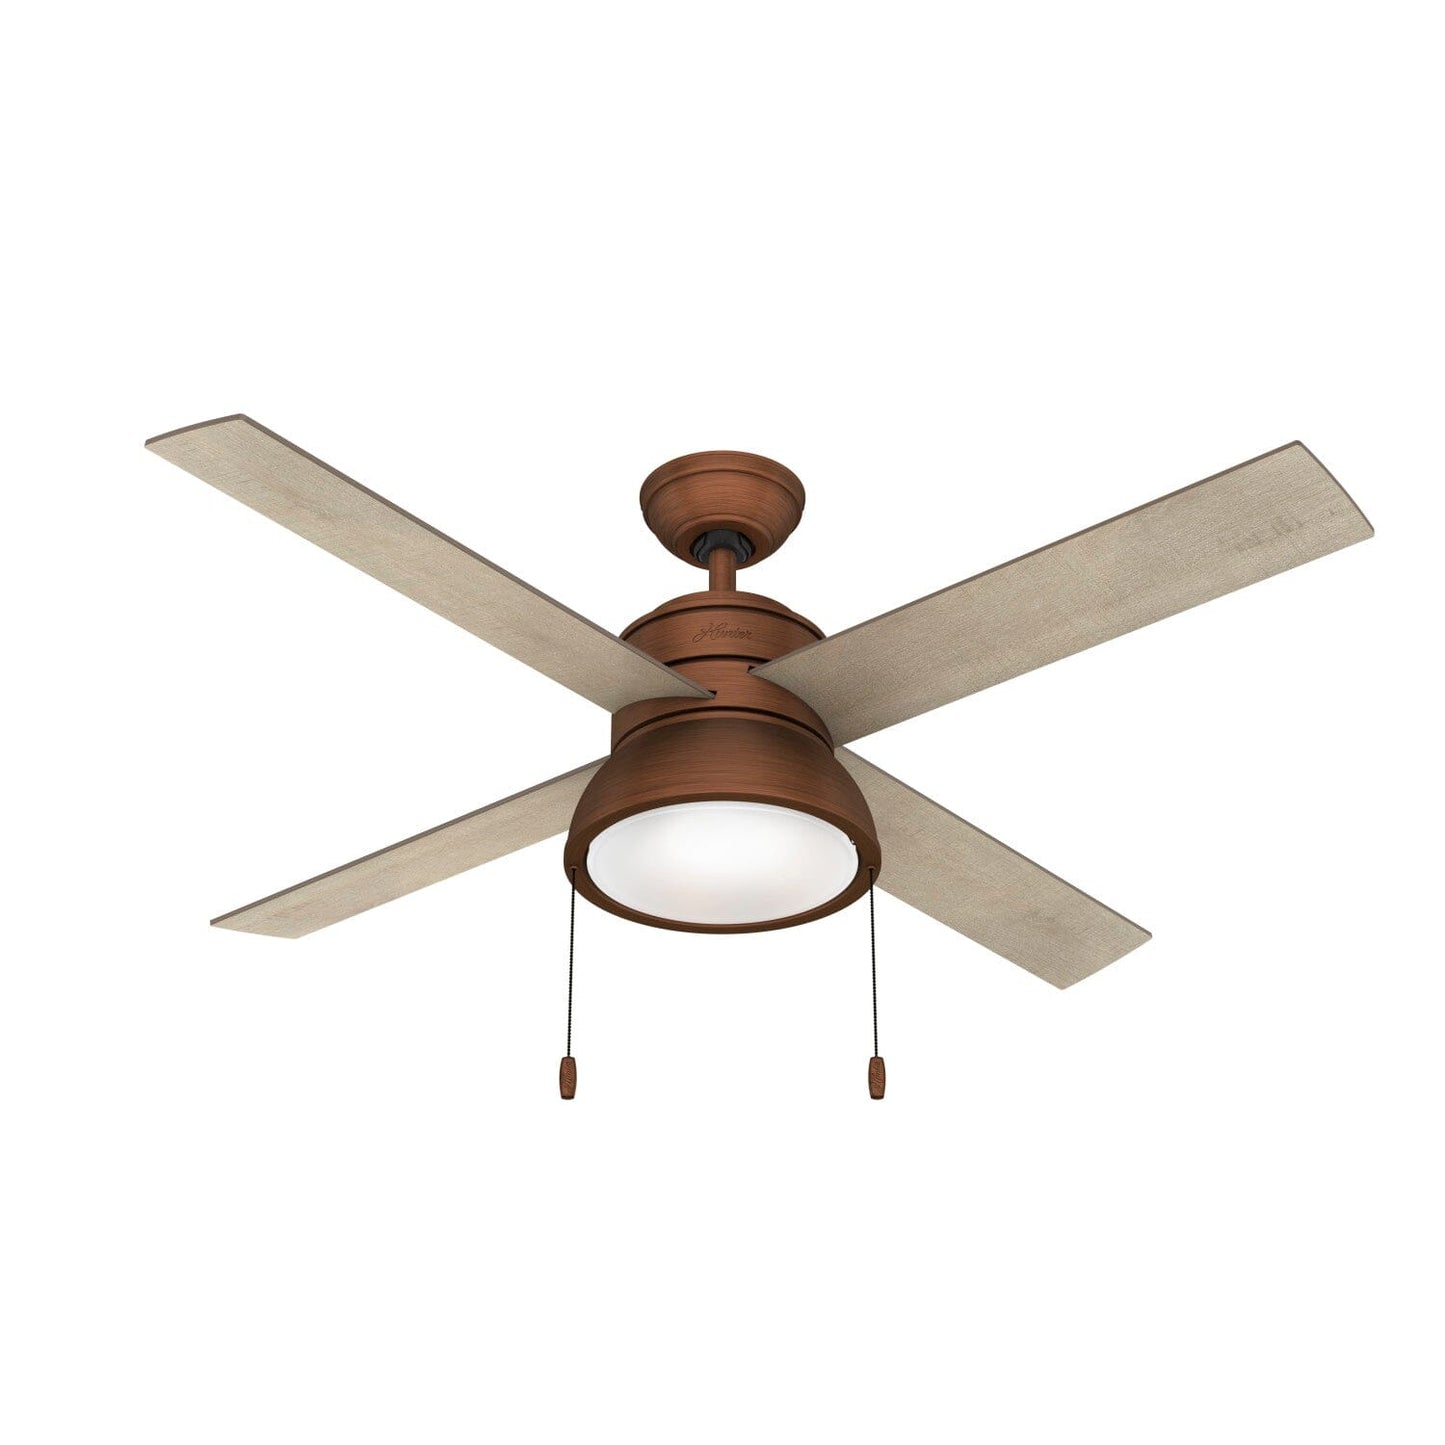 LOKI WITH LED LIGHT 52 INCH Ceiling Fans Hunter Weathered Copper - Barnwood 